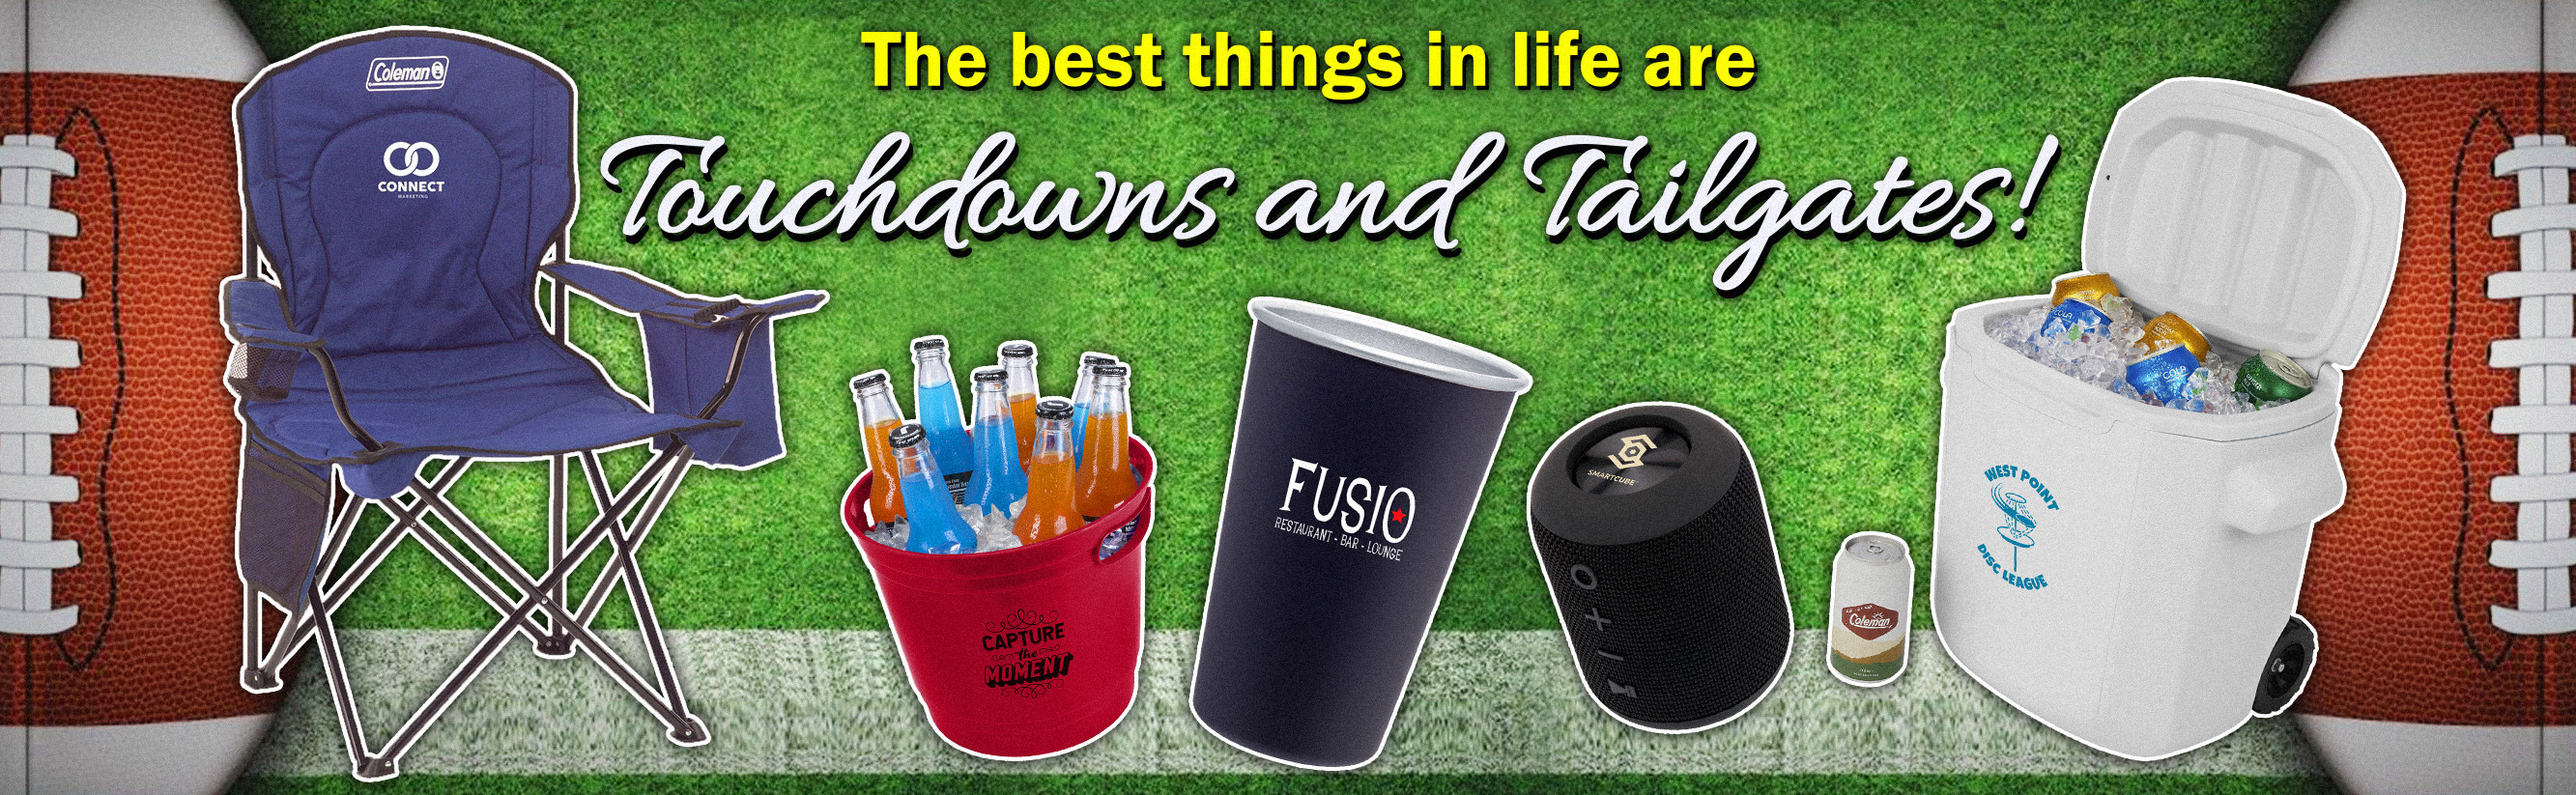 Corporate gifts and advertising specialties from rushIMPRINT